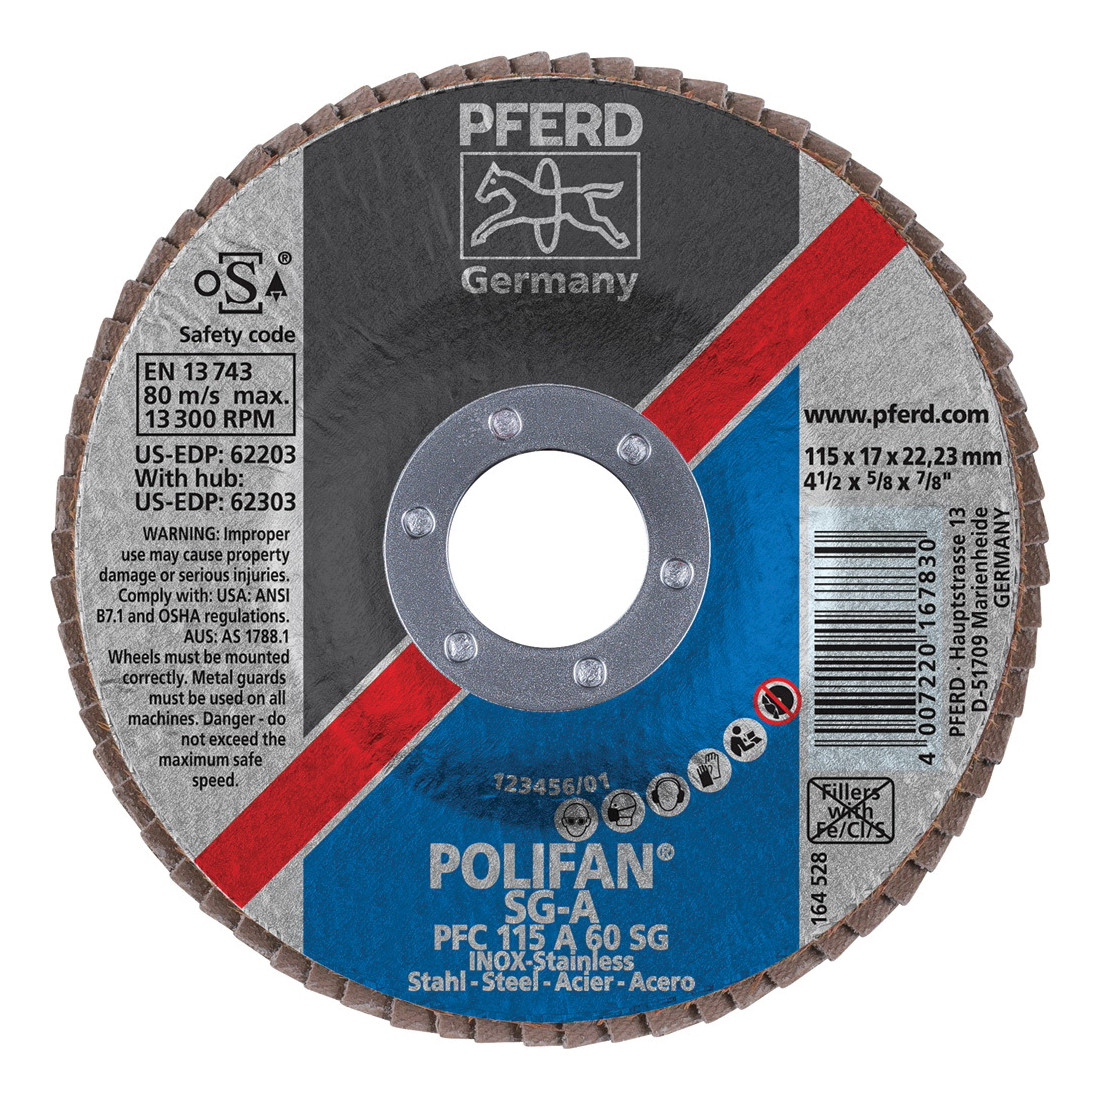 PFERD Polifan® 62203 Performance Line SG A Unthreaded Coated Abrasive Flap Disc, 4-1/2 in Dia, 7/8 in Center Hole, 60 Grit, Aluminum Oxide Abrasive, Type 29 Conical Disc